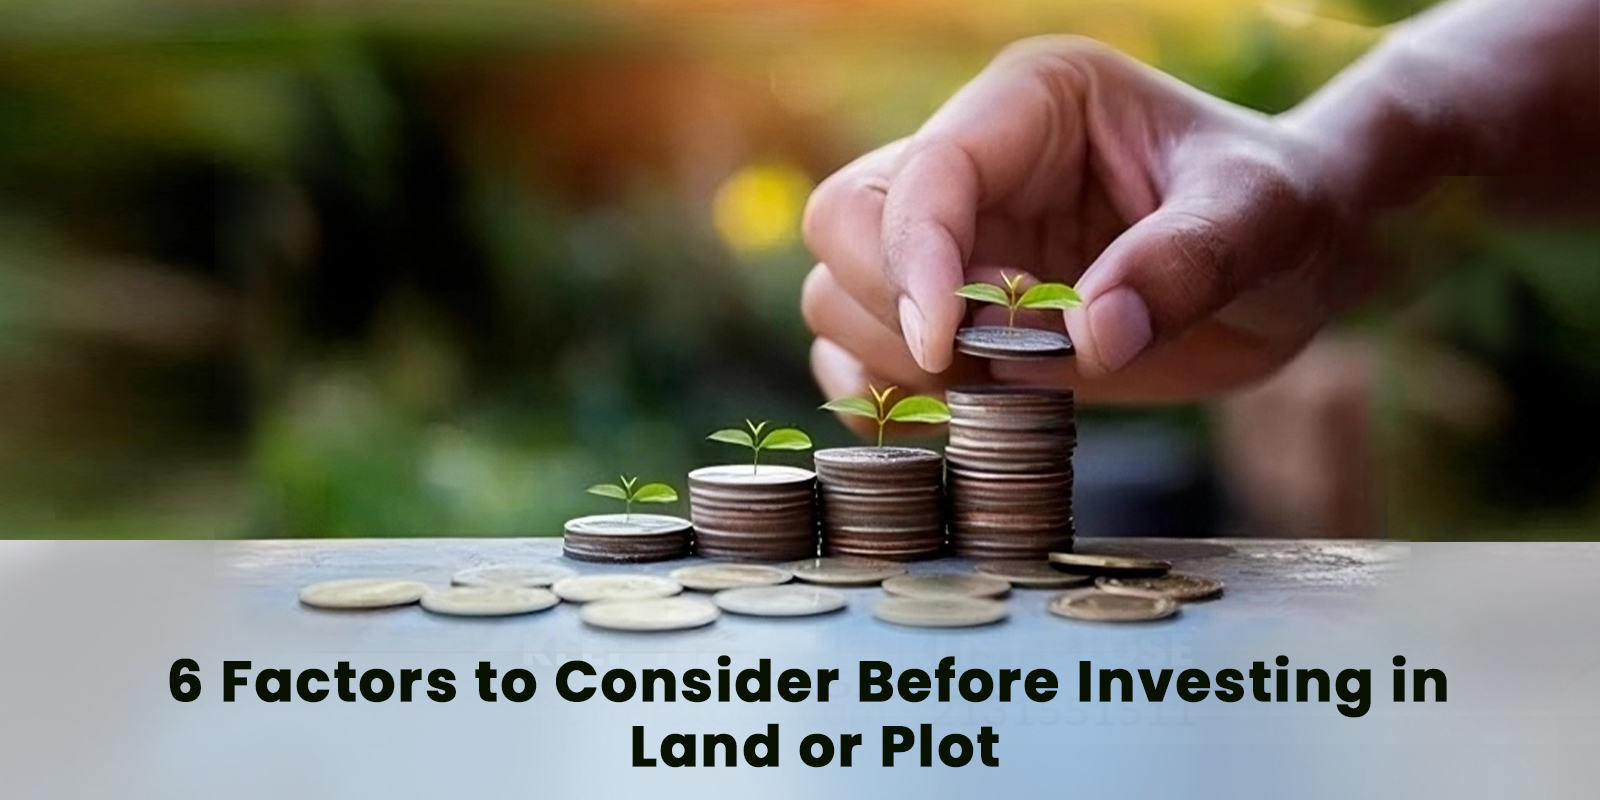 6 Factors to Consider Before Investing in Land or Plot